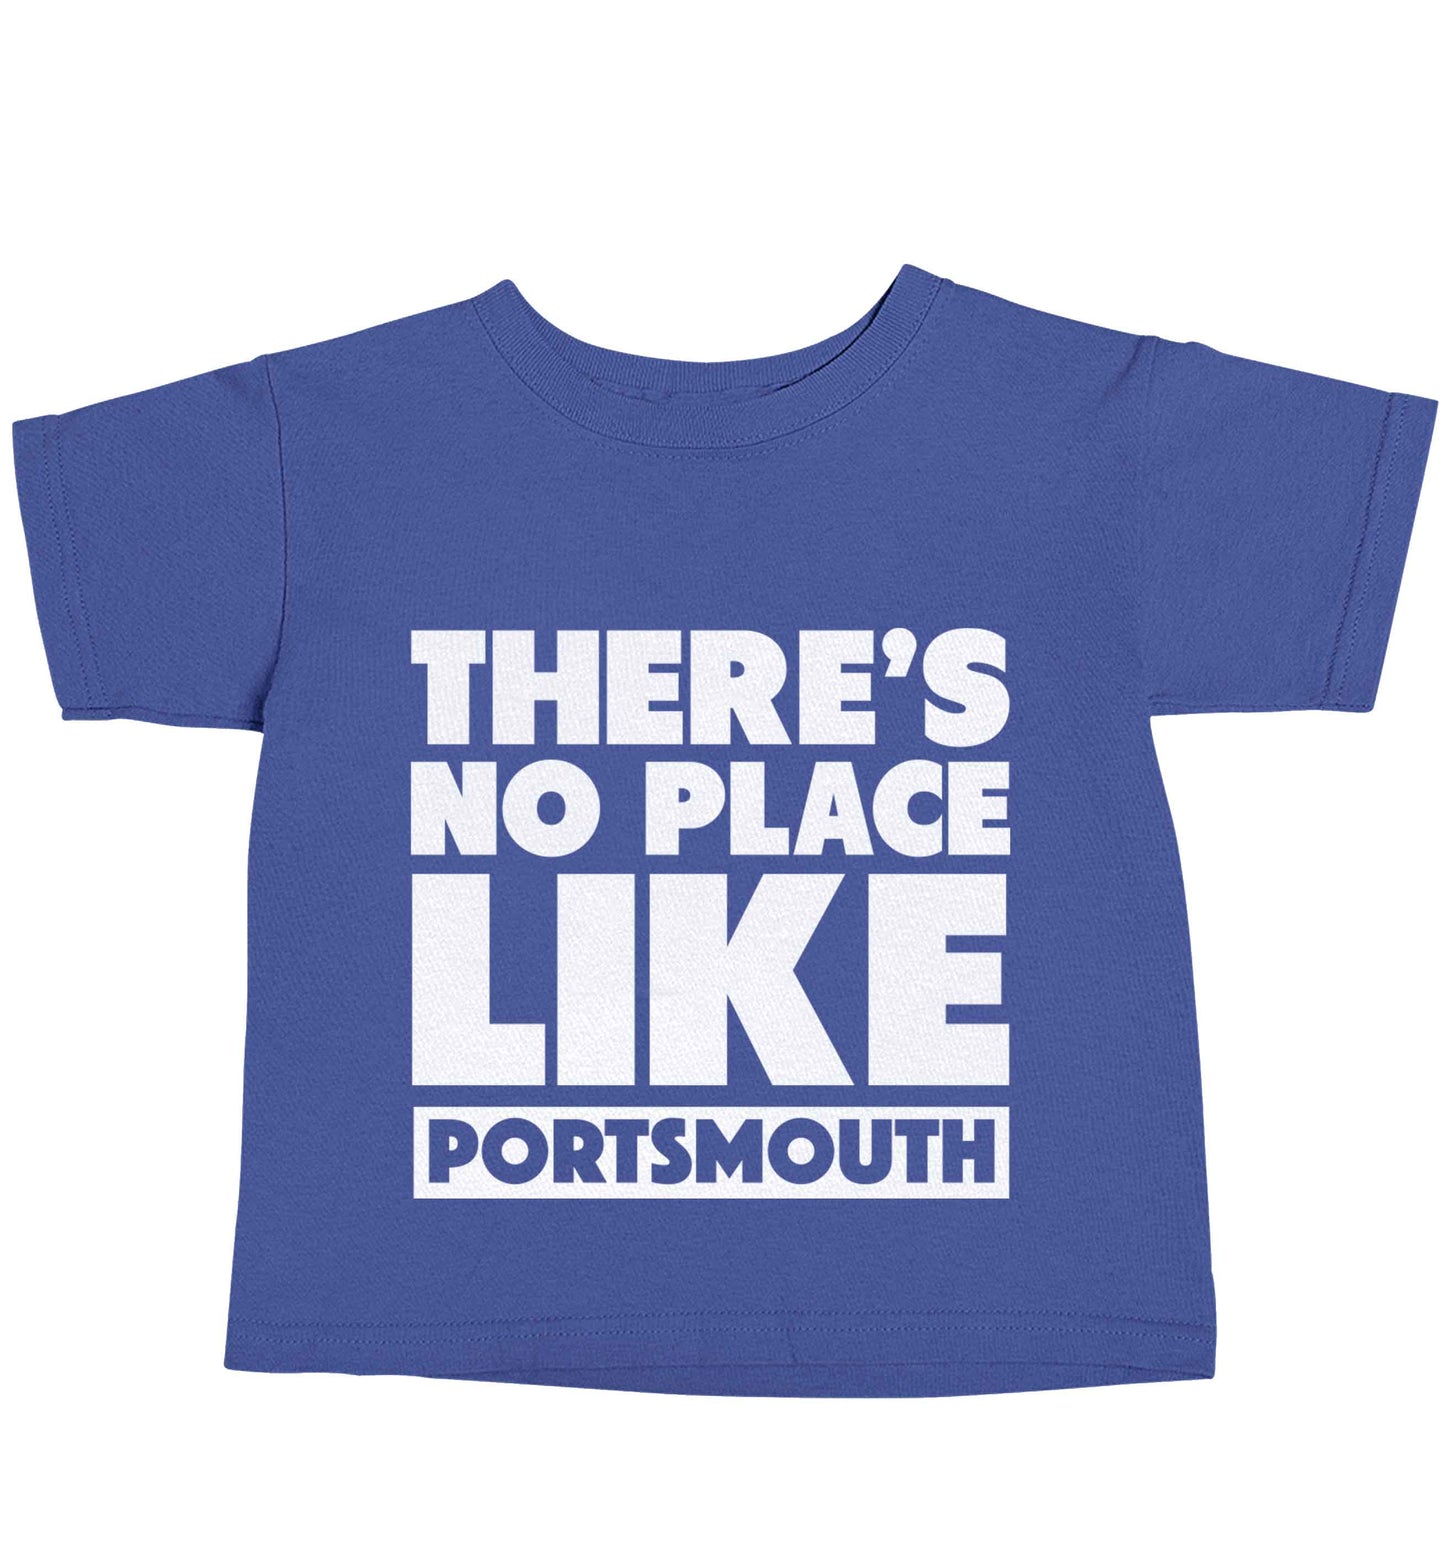 There's no place like Porstmouth blue baby toddler Tshirt 2 Years